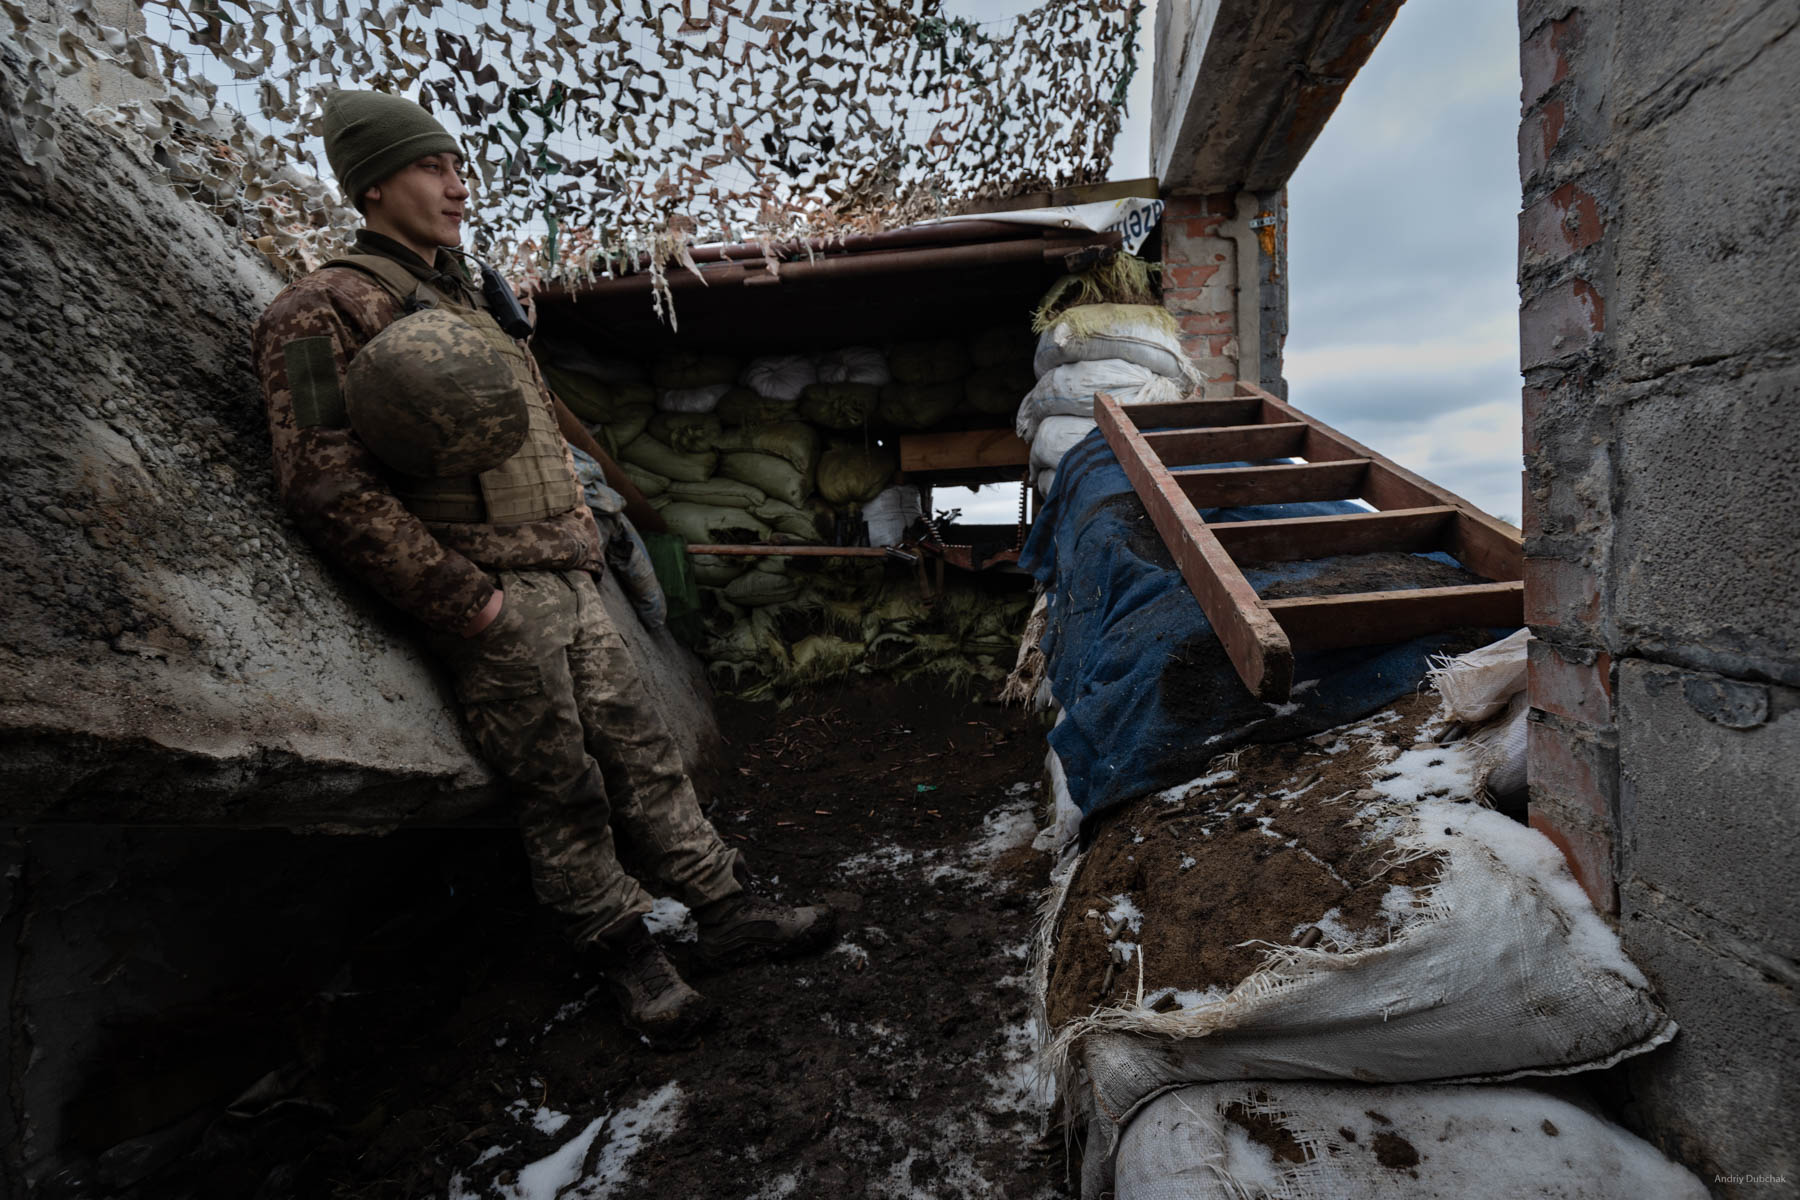 At one of the front positions, I speak with “Archie”, a 20-year-old boy from the region of Nikolayev. He tells us that the militants often try to approach our positions through wood lines at night; our warriors have to respond with fire at regular intervals. Shirokine, March 2018. Video: https://goo.gl/iVAXZB